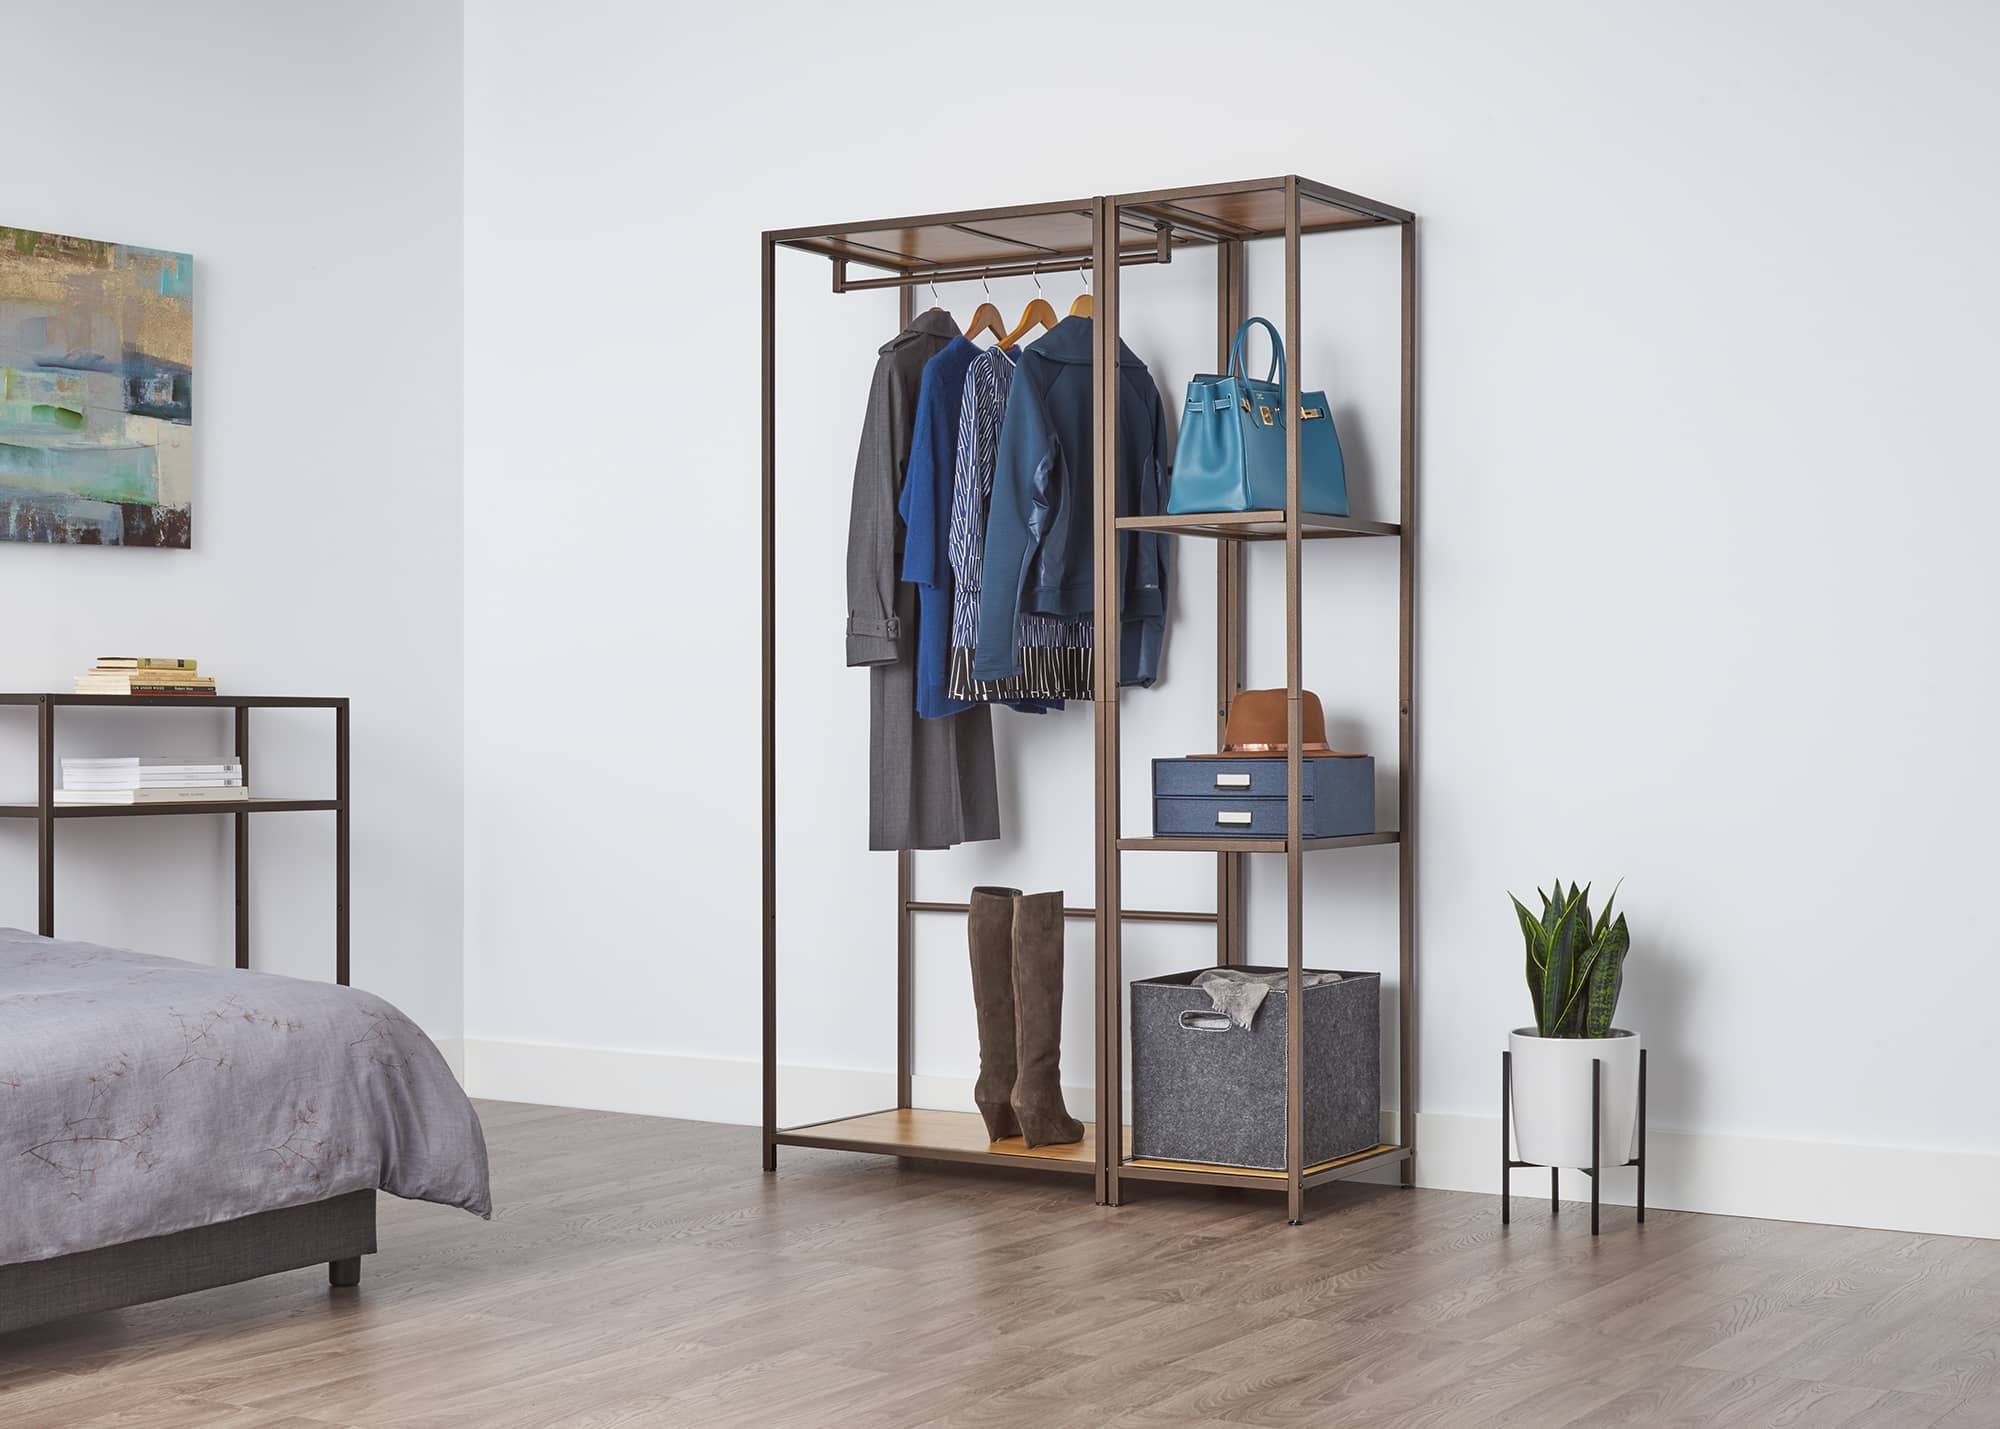 1 garment rack and 1 shelving tower as a closet organizer in an apartment room